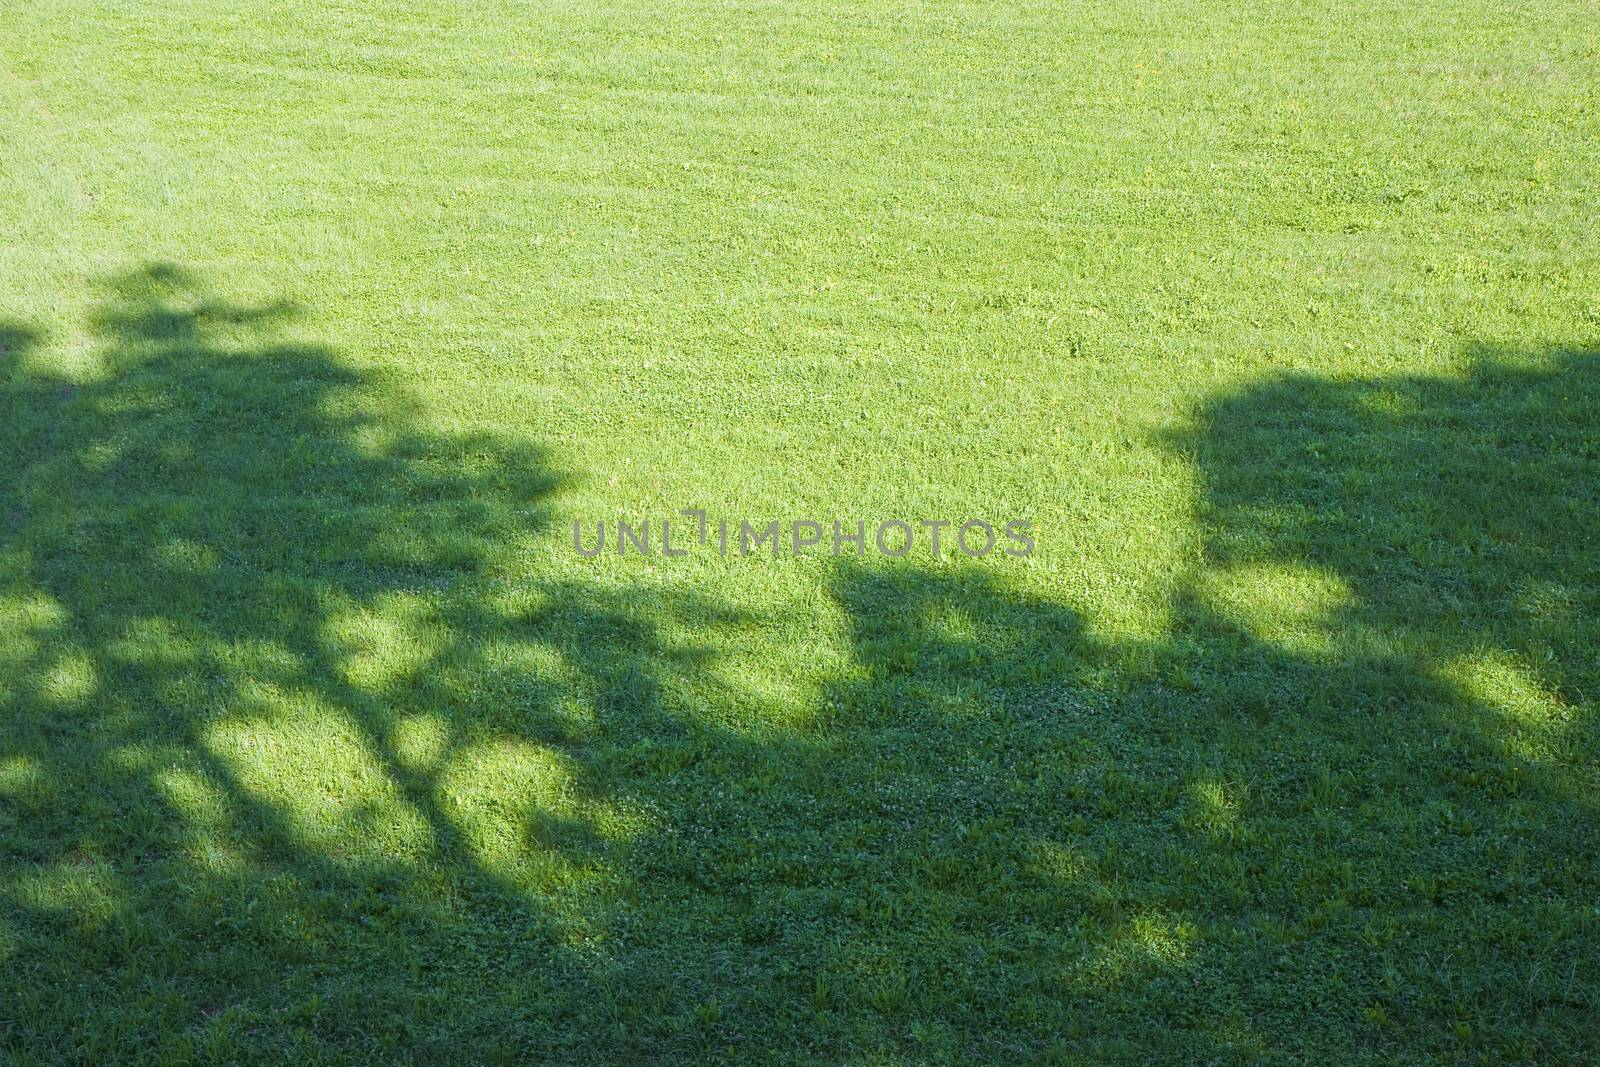 Green mowed lawn with tree shadow by FrancescoScatena